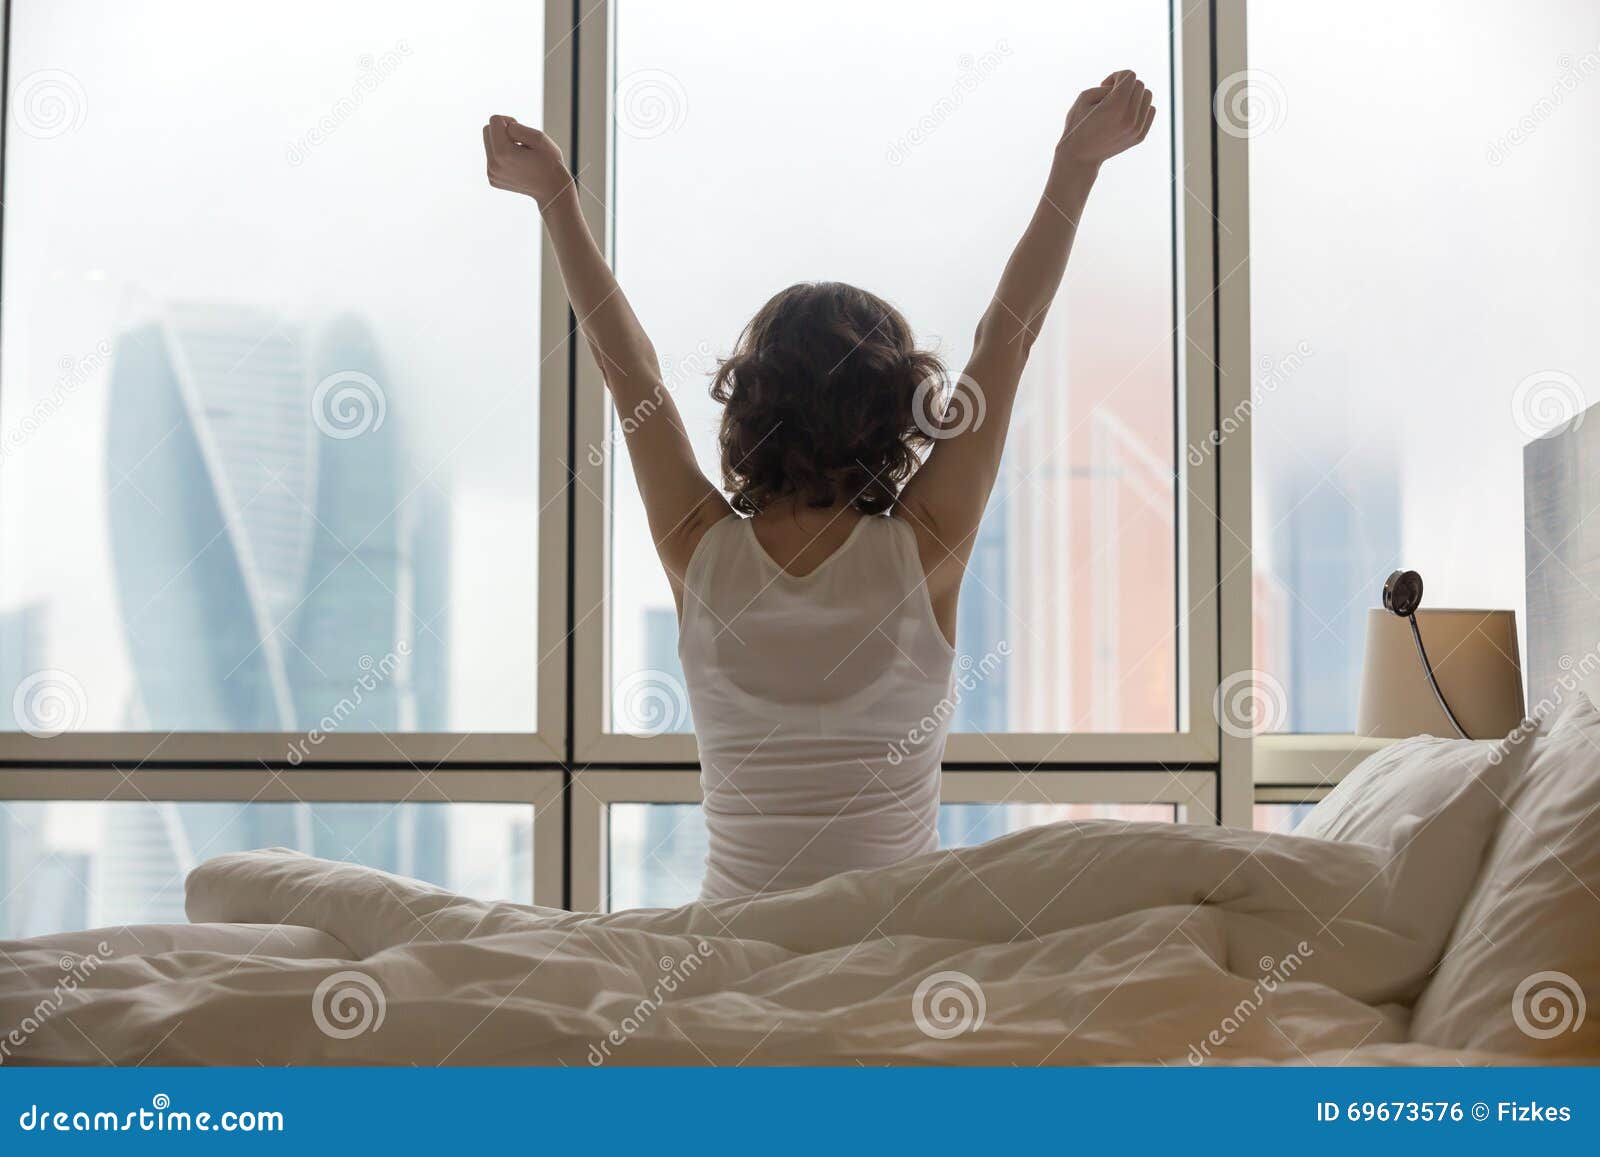 young woman stretching after waking up